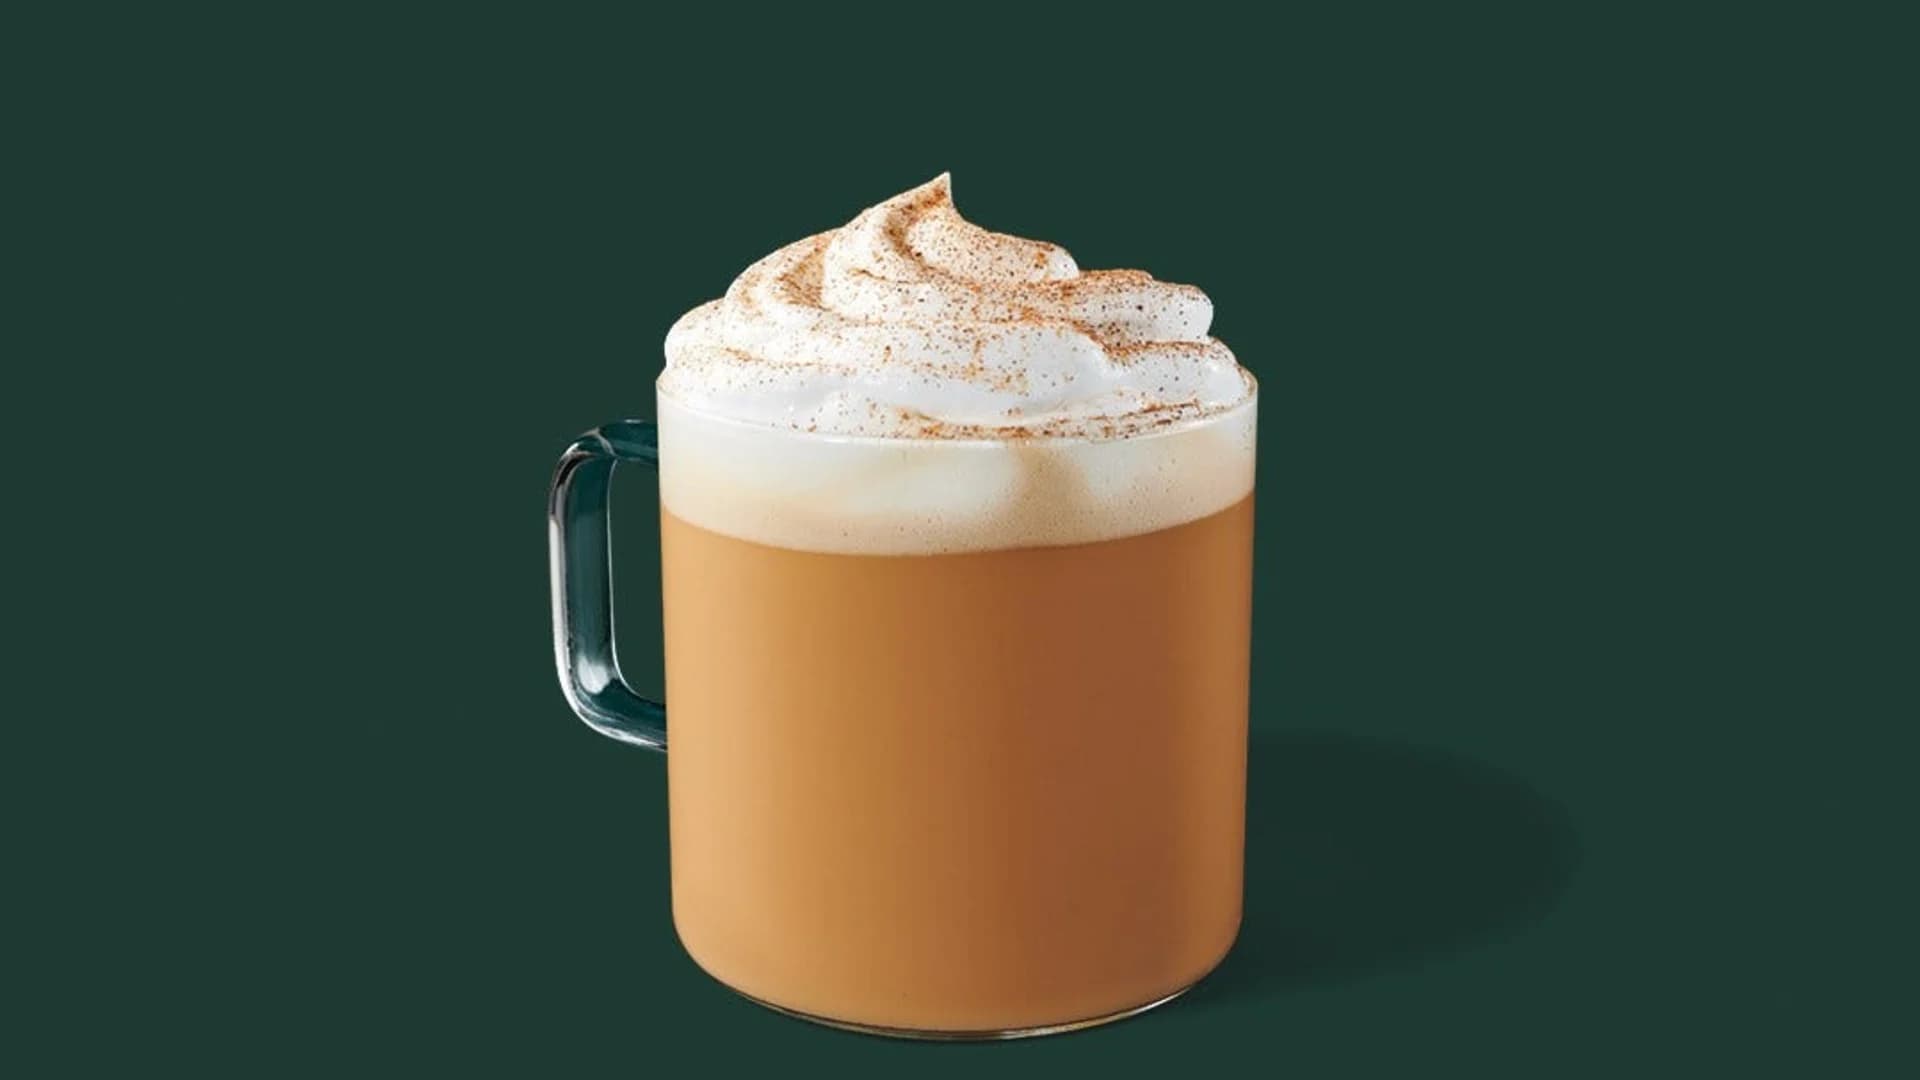 PSL is back and Starbucks wants you to FALL for its new pumpkin drink